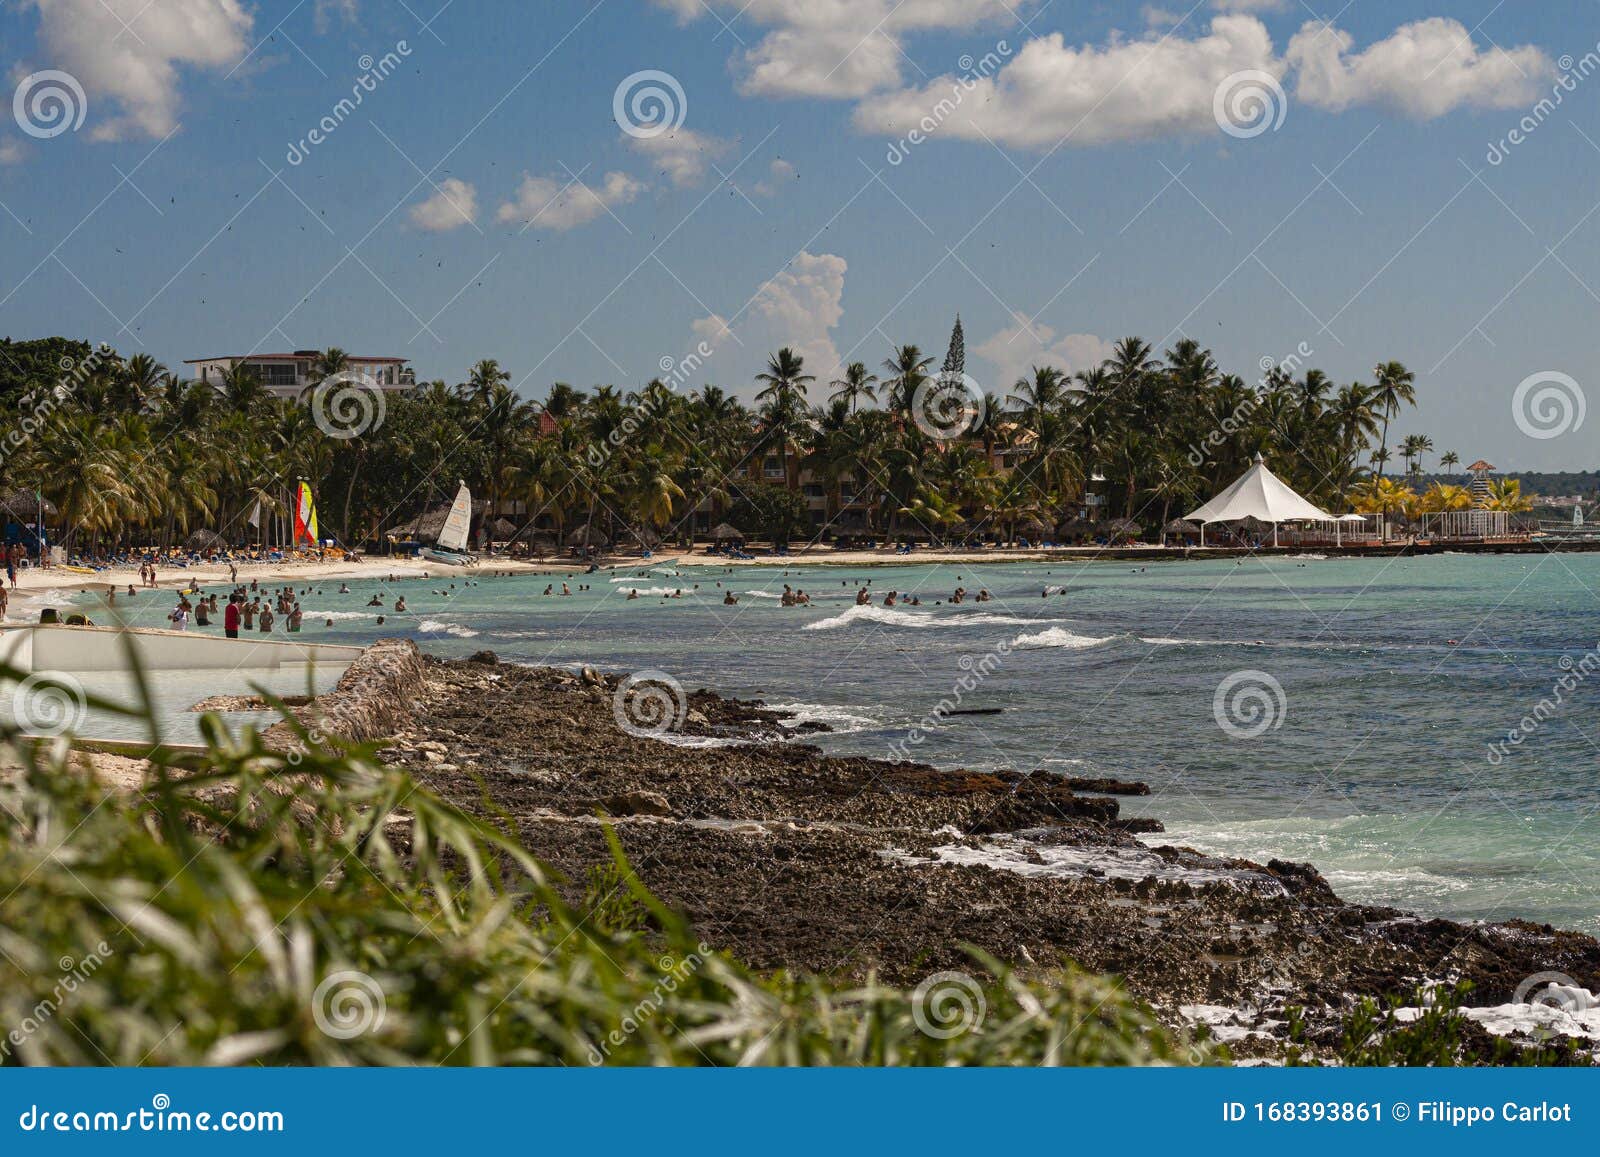 view of the dominicus coast 3